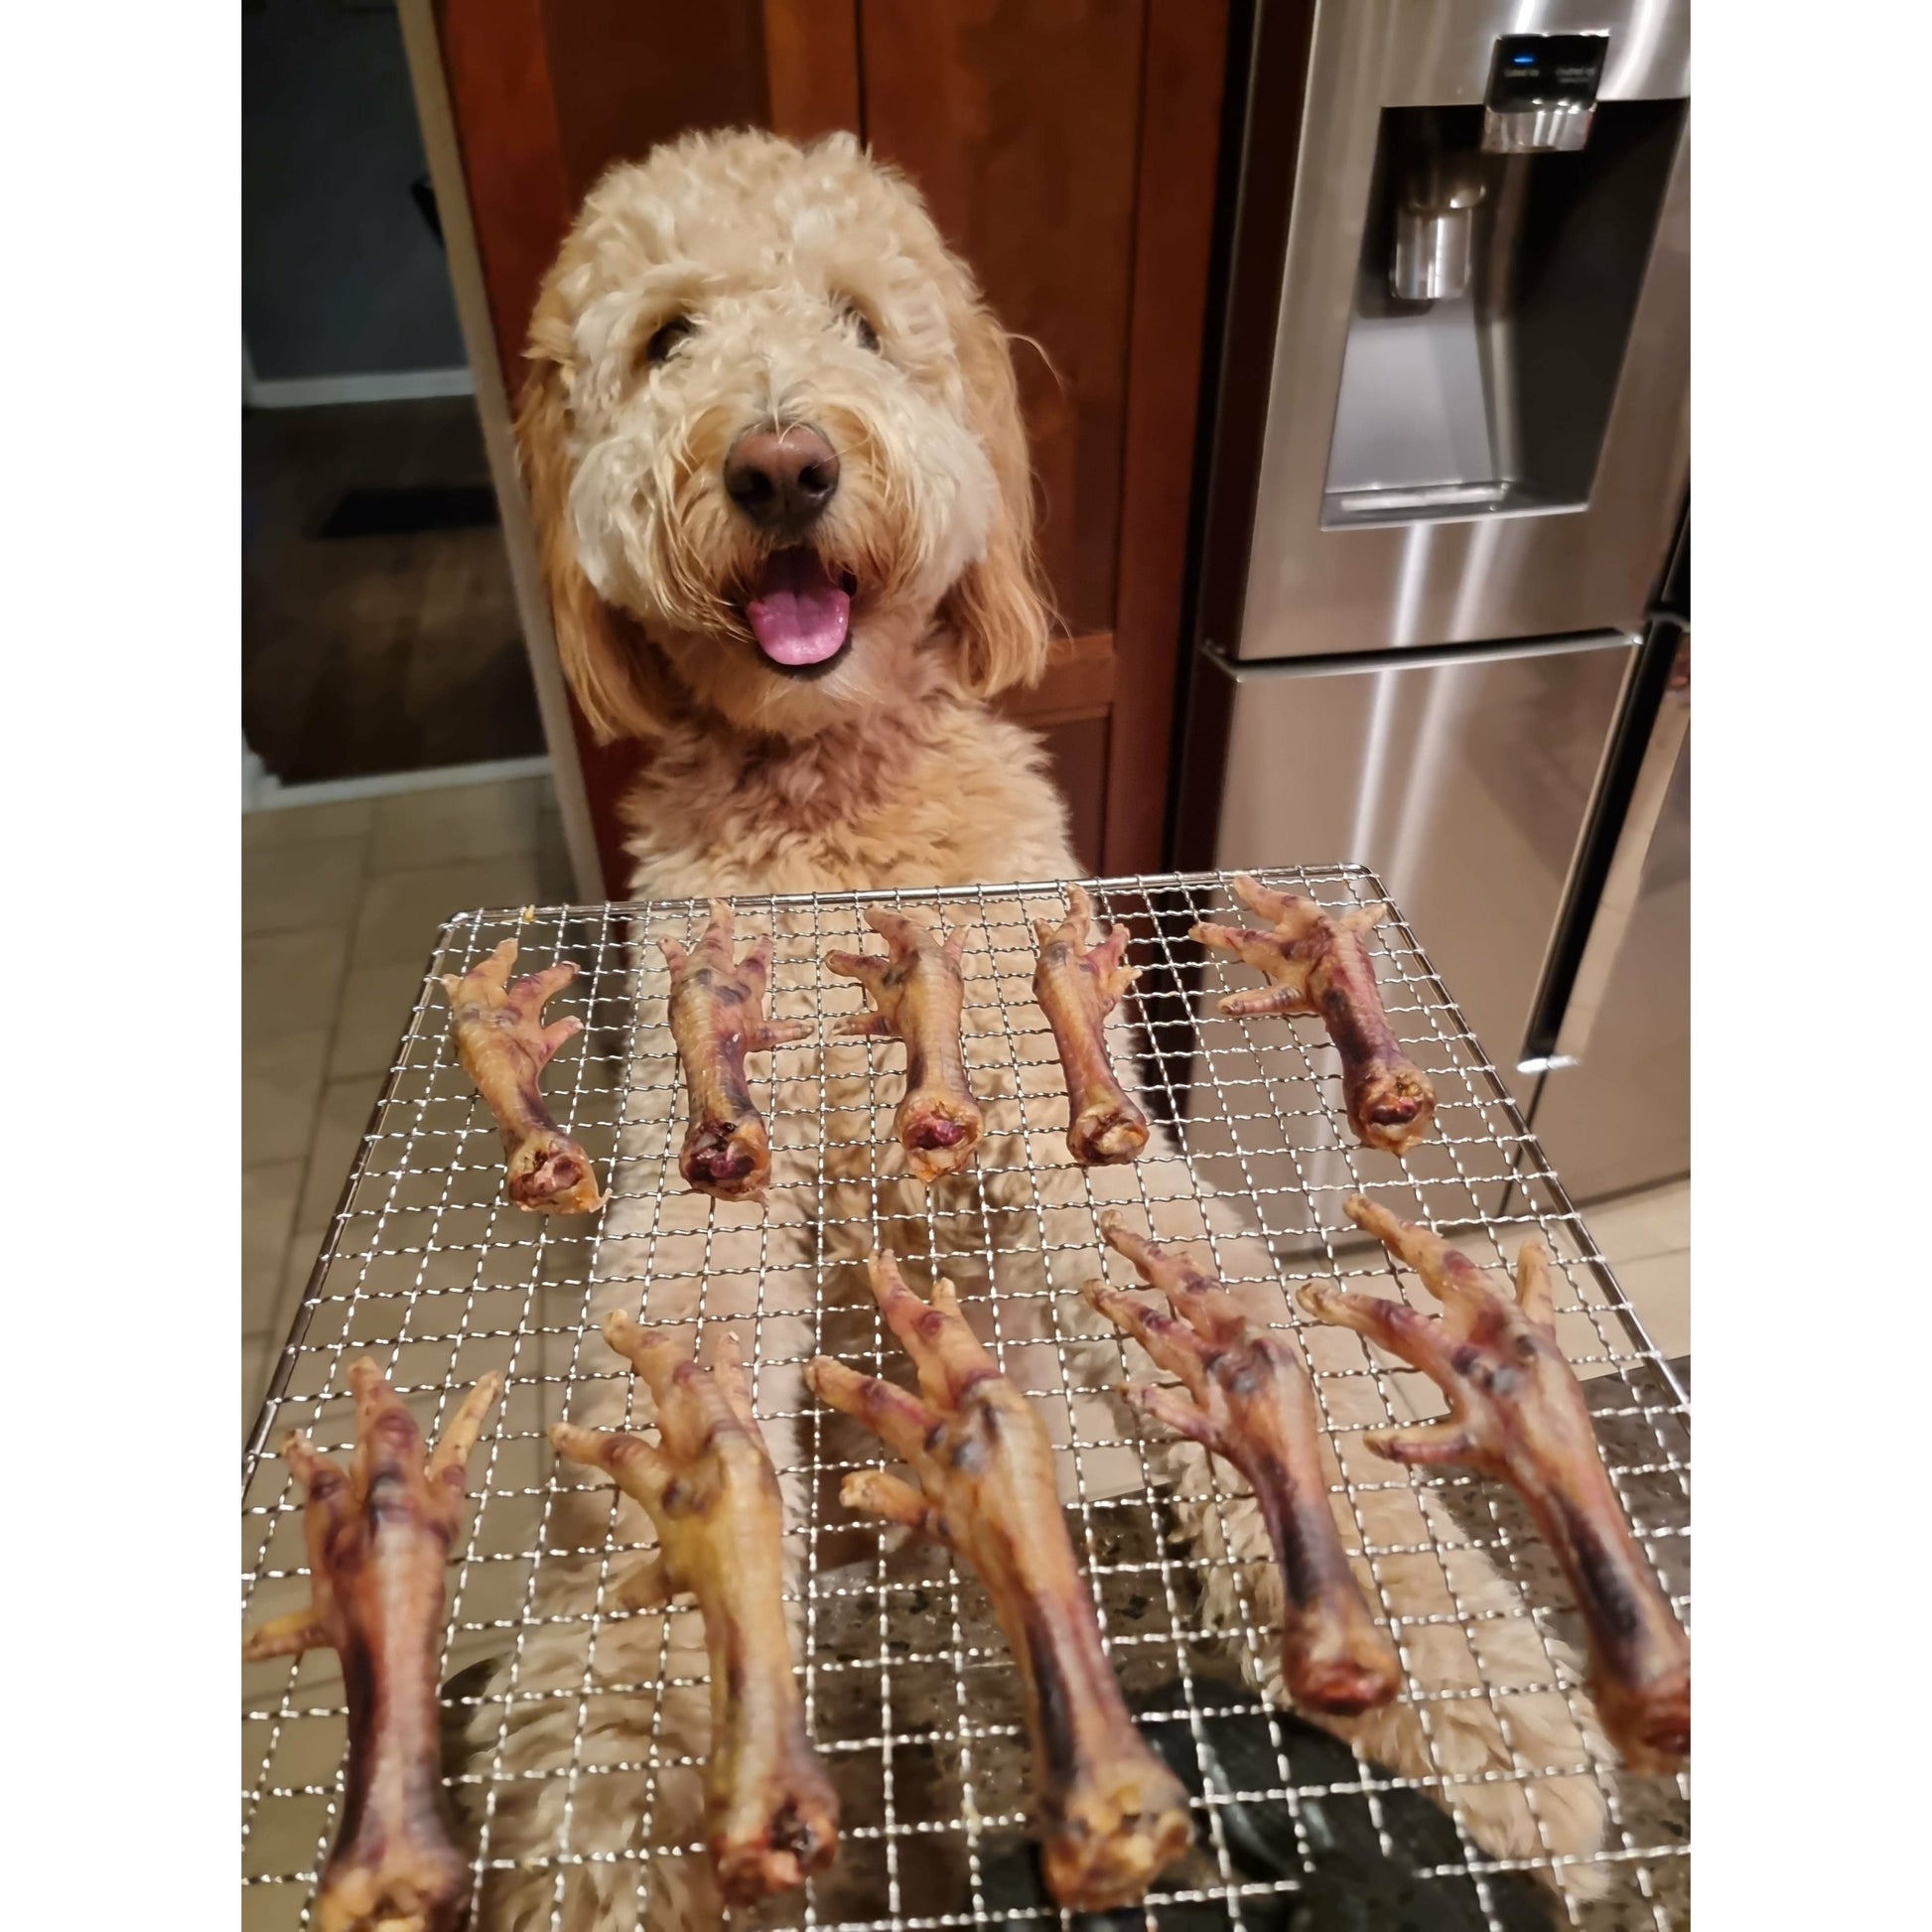 natural single ingredient dog treats dehydrated chicken feet size: 7 nail clipped feet per bag